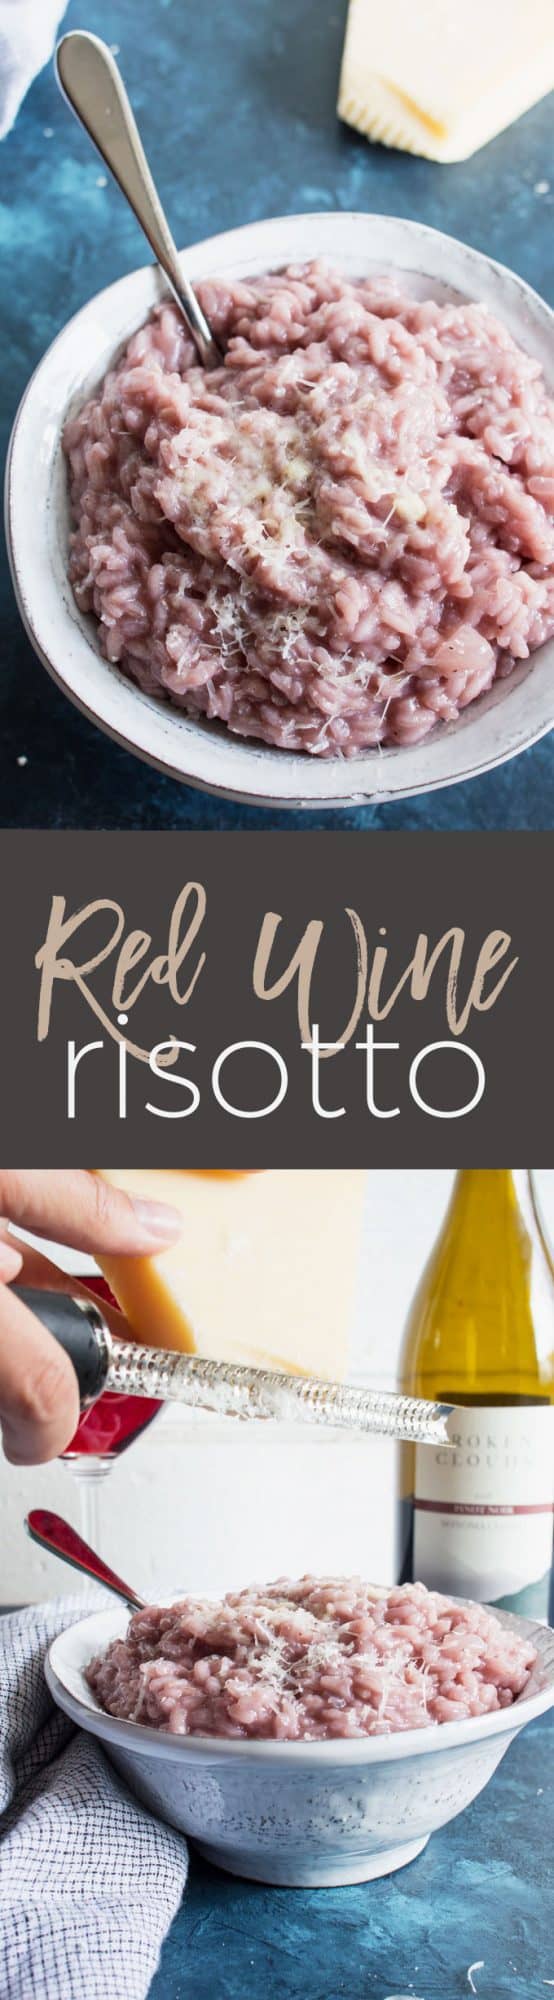 red wine risotto pin